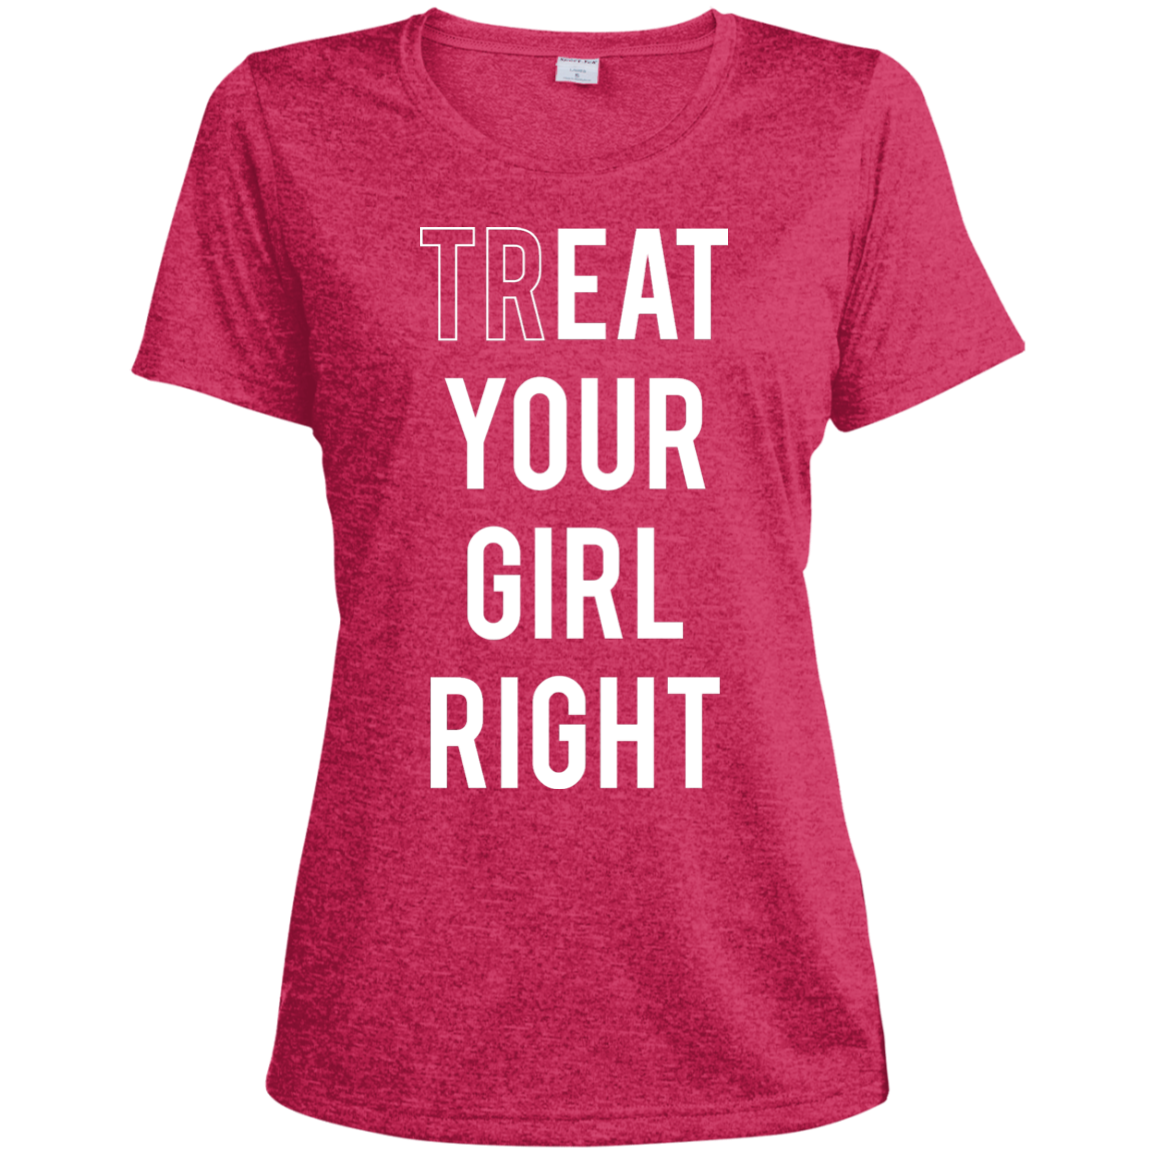 pink funny quoted tshirt for girls/women/lesbian